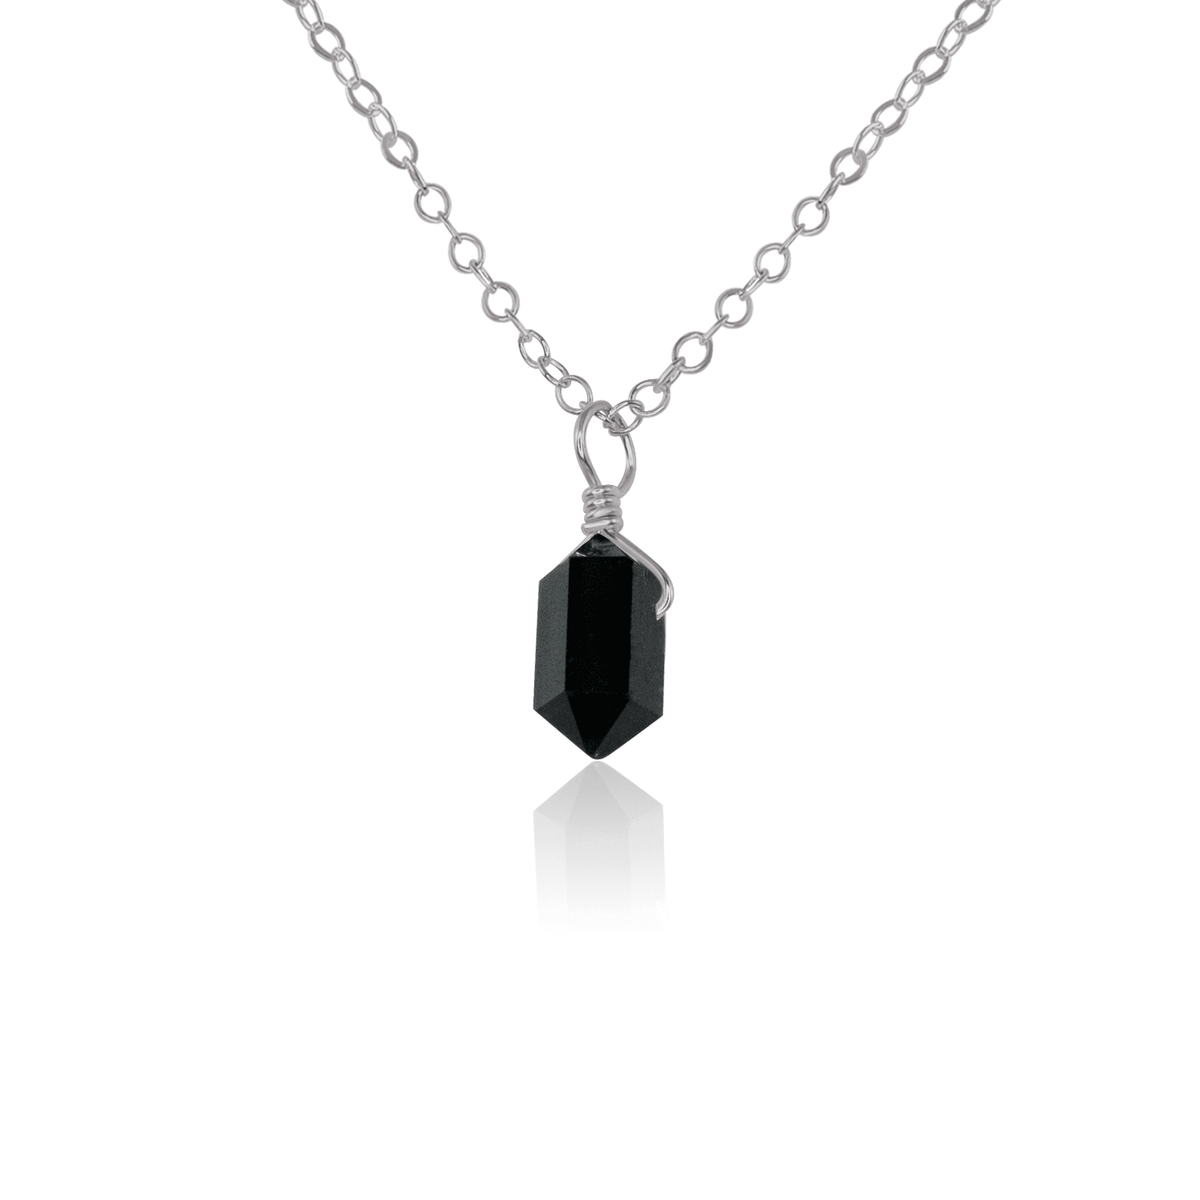 Double Terminated Crystal Pendant Necklace - Black Tourmaline - Stainless Steel - Luna Tide Handmade Jewellery